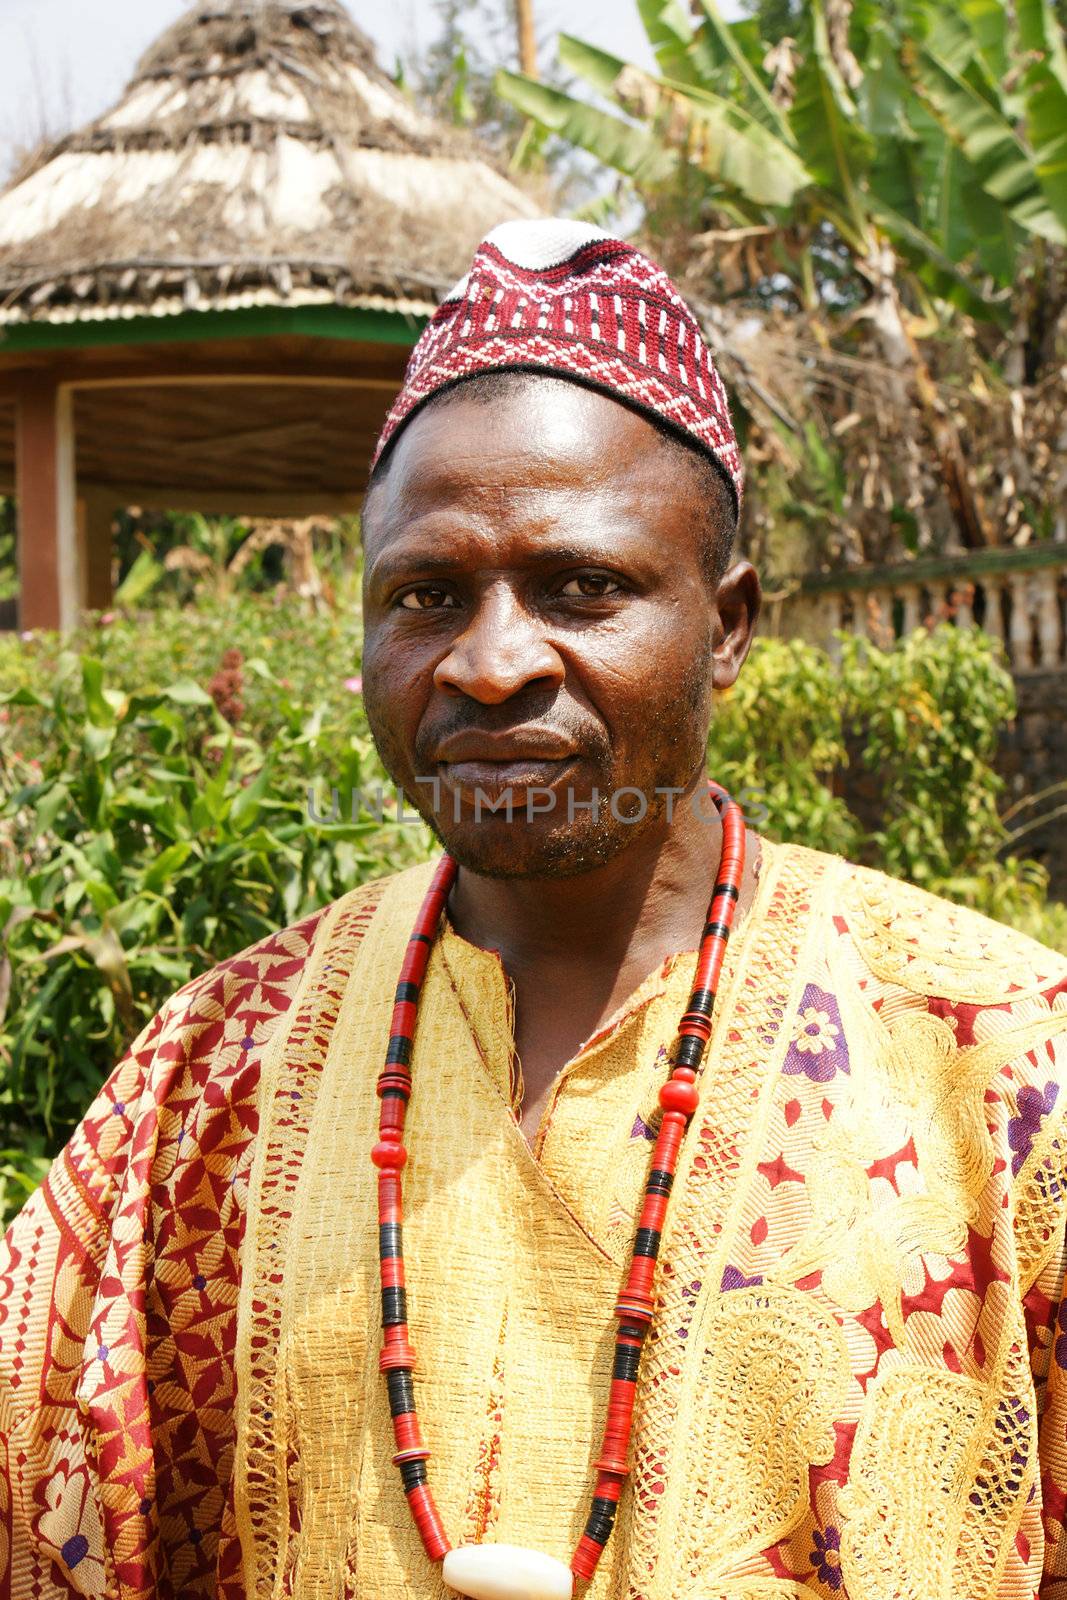 AFRICA,CAMEROON, FONGO-TONGO - JANUARY 20: portrait of an African village Chief posing in traditional Bamileke clothes on January, 20, 2013 Cameroon. The Bamileke tribe is the dominant ethnic group in Cameroon's West and Northwest Provinces where tourism is a growing part of the economy.